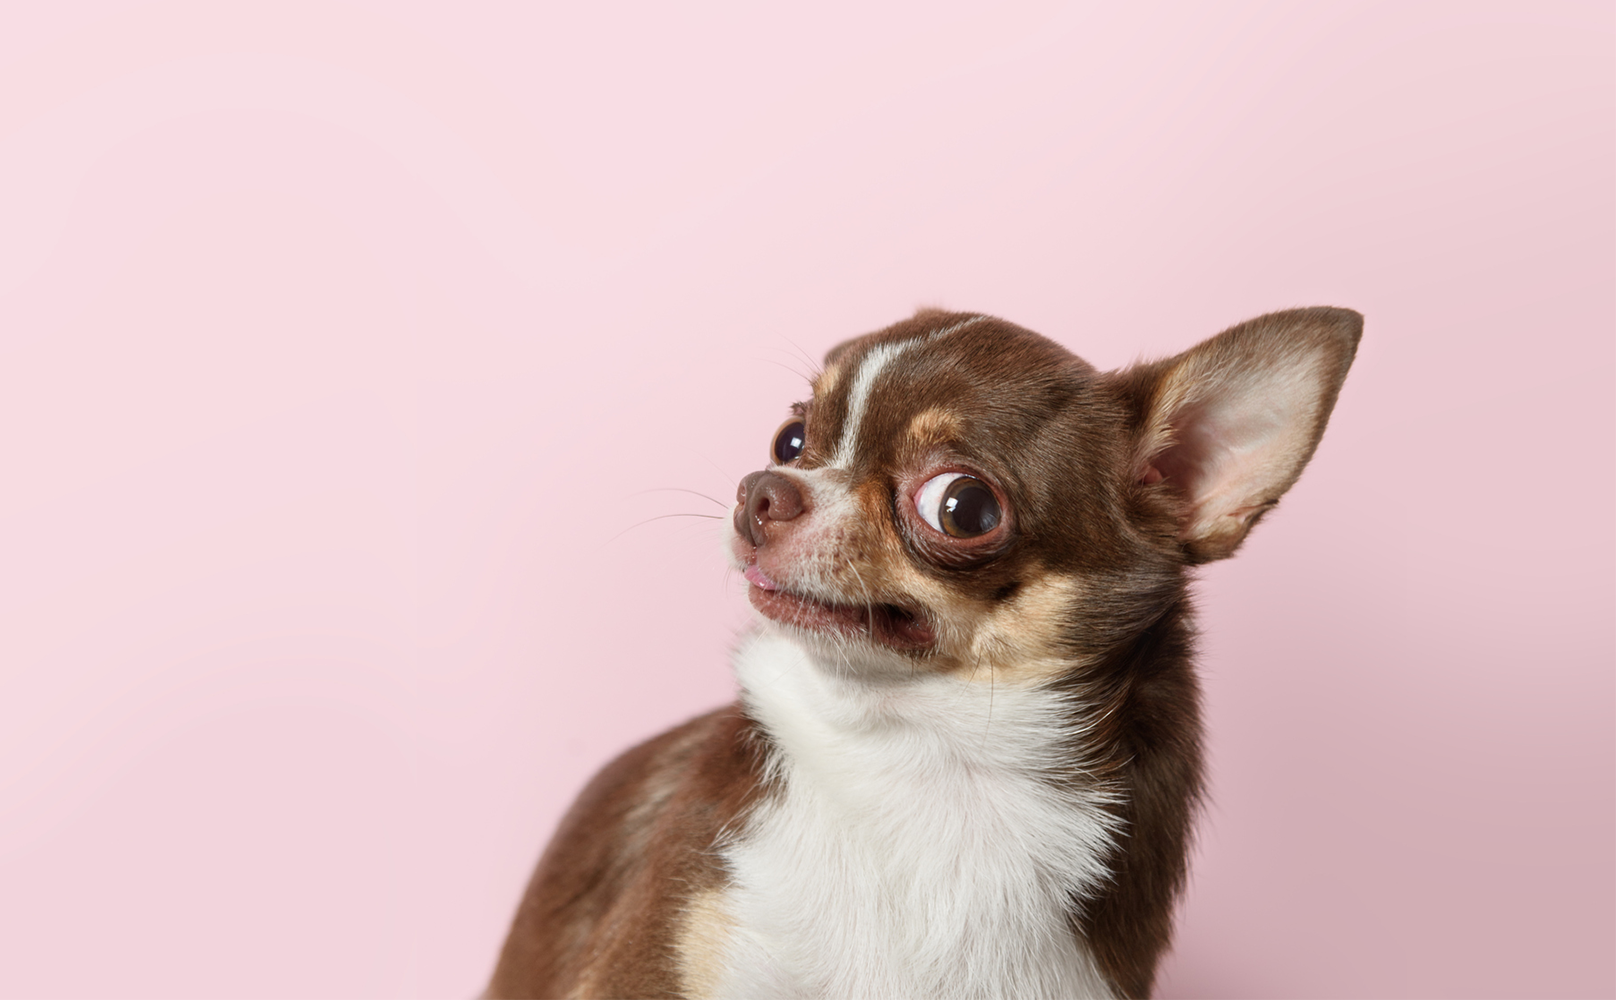 what are chihuahuas descended from